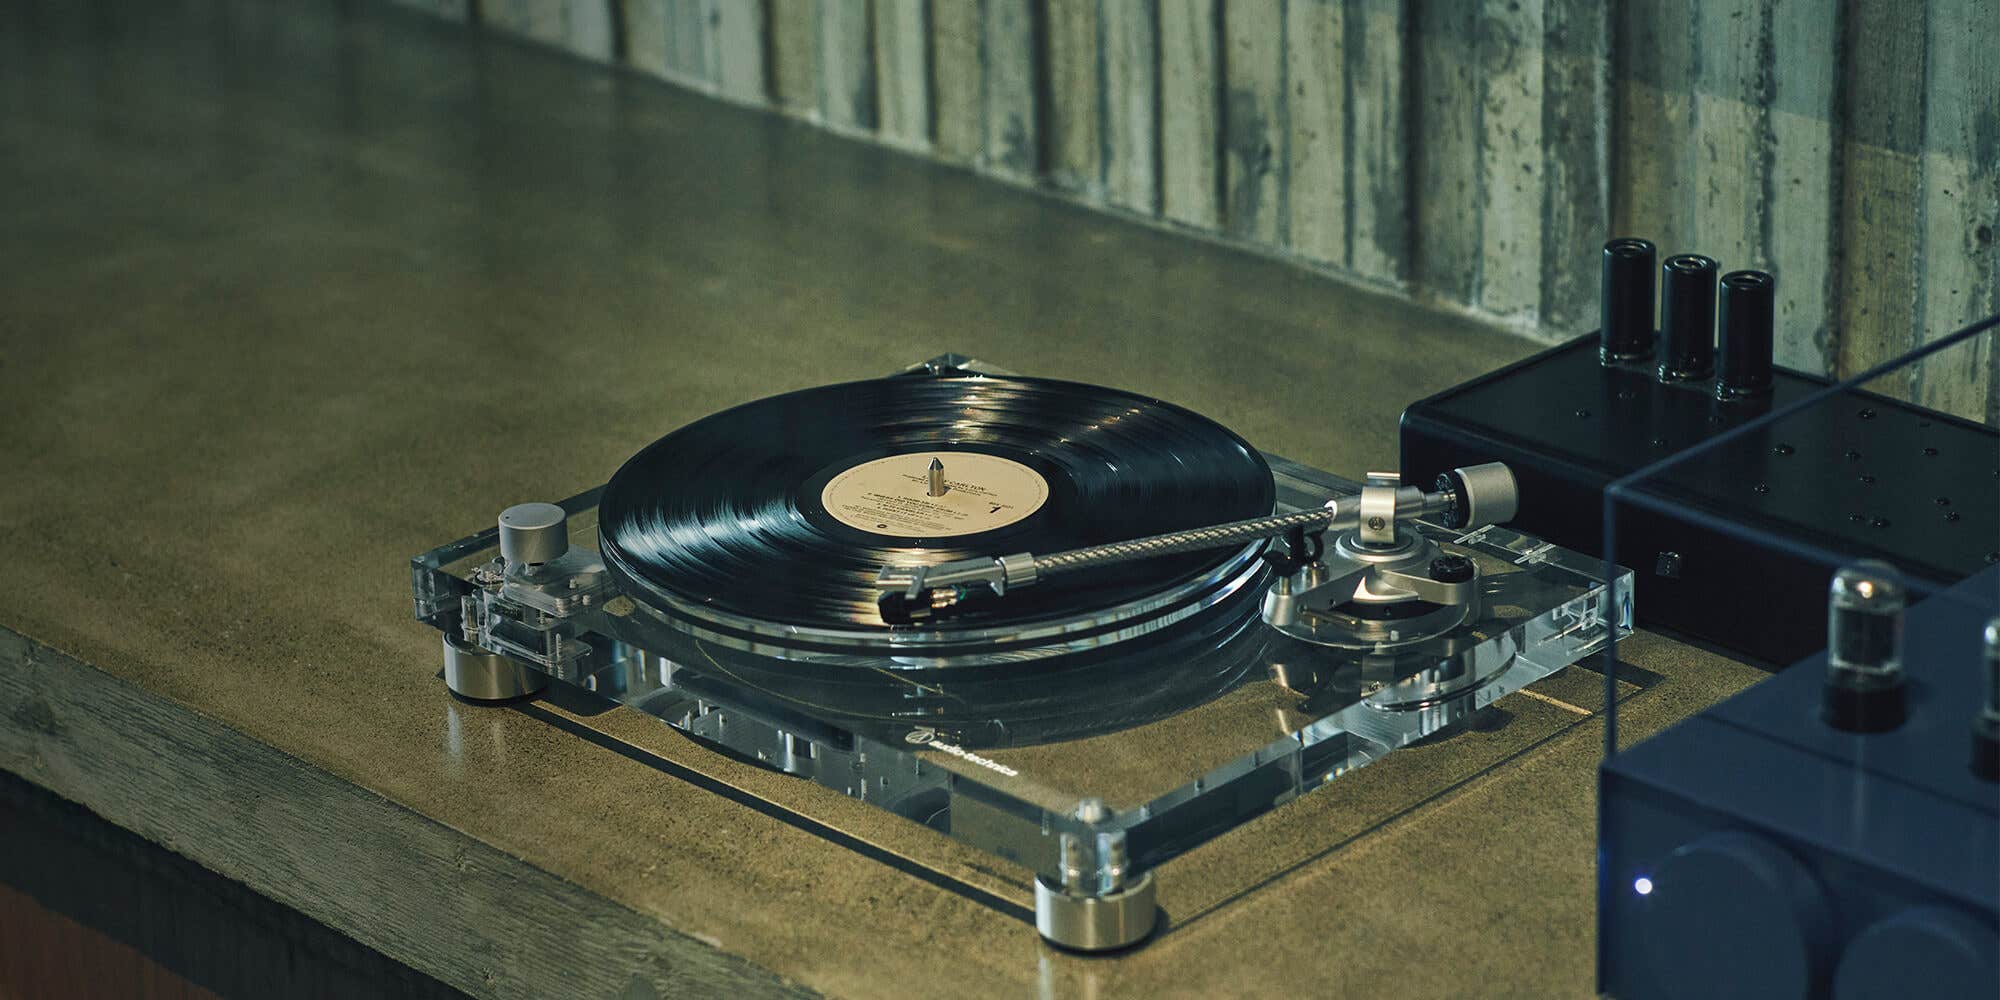 Limited Edition 60th Anniversary AT-LP2022 Turntable